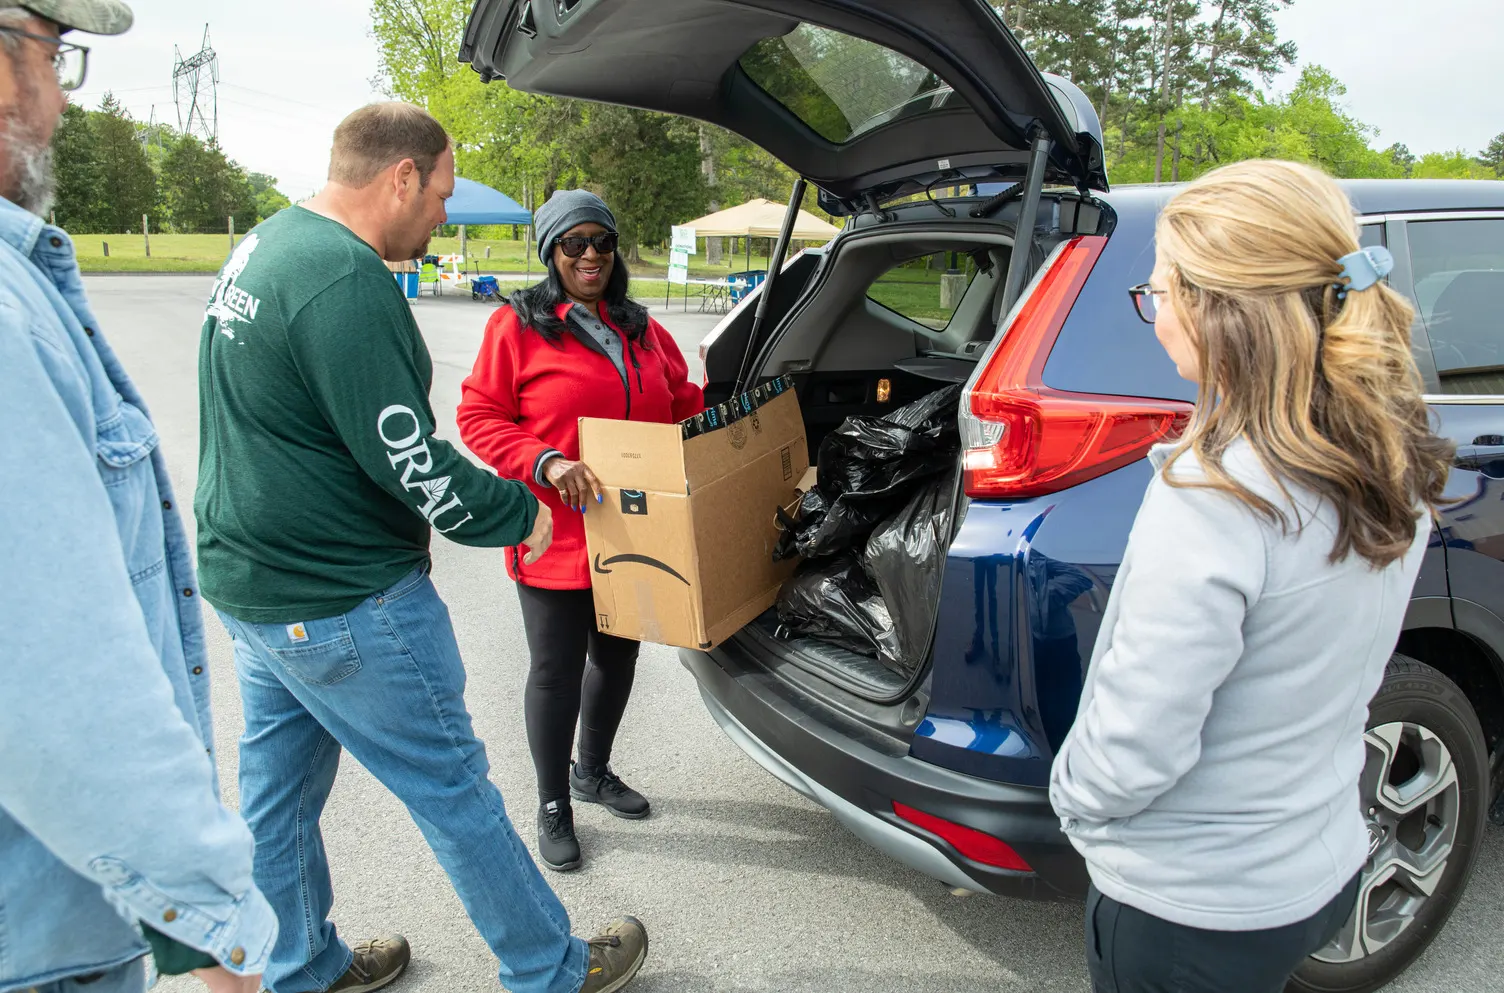 Employees participate in the annual Earth Day recycling event